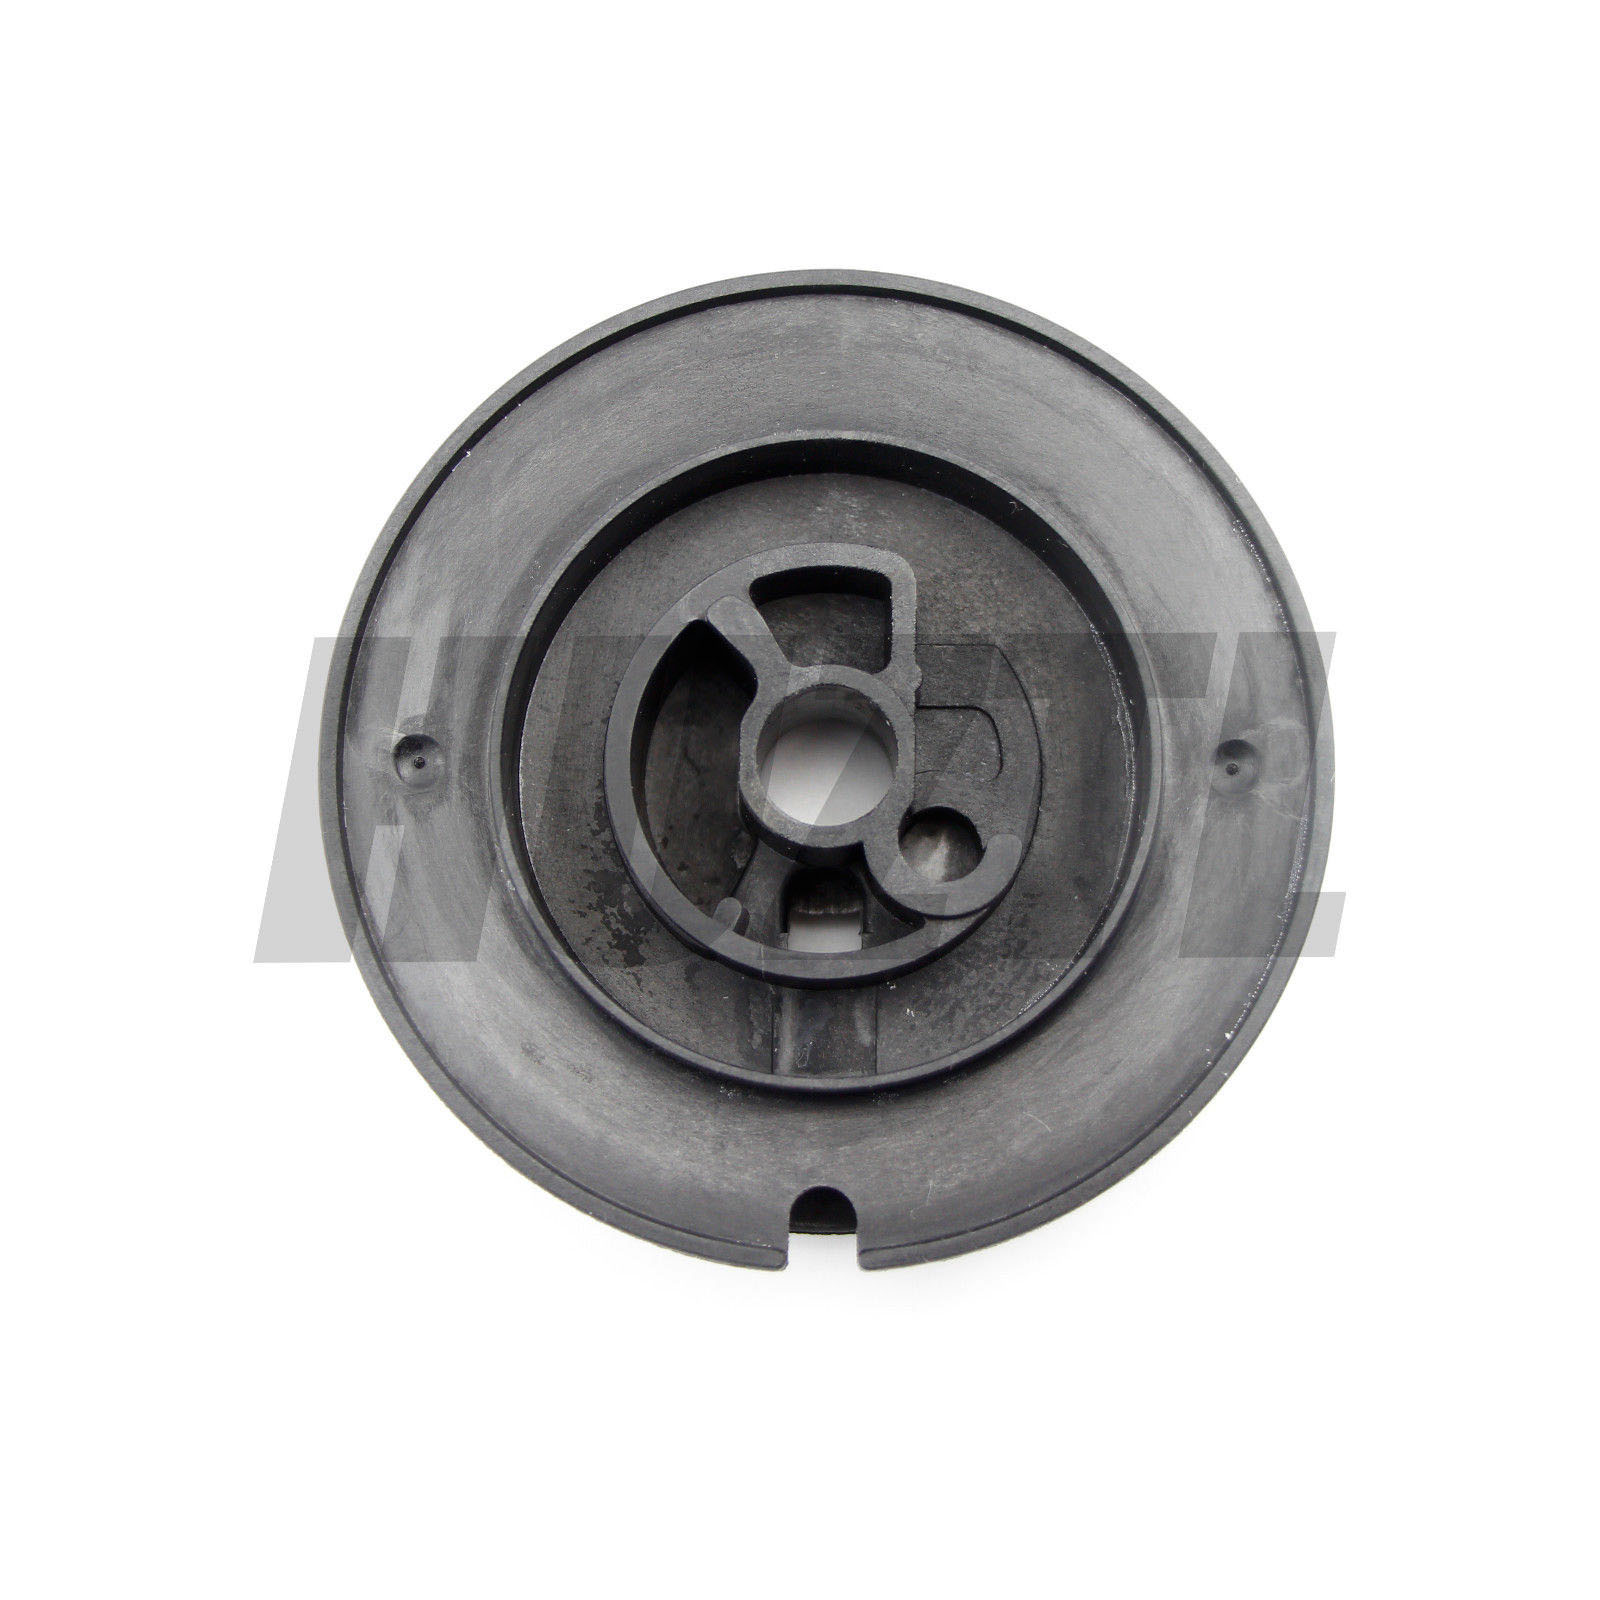 RECOIL START STARTER PULLEY FOR STIHL TS400 CONCRETE SAW 4223 190 1001 